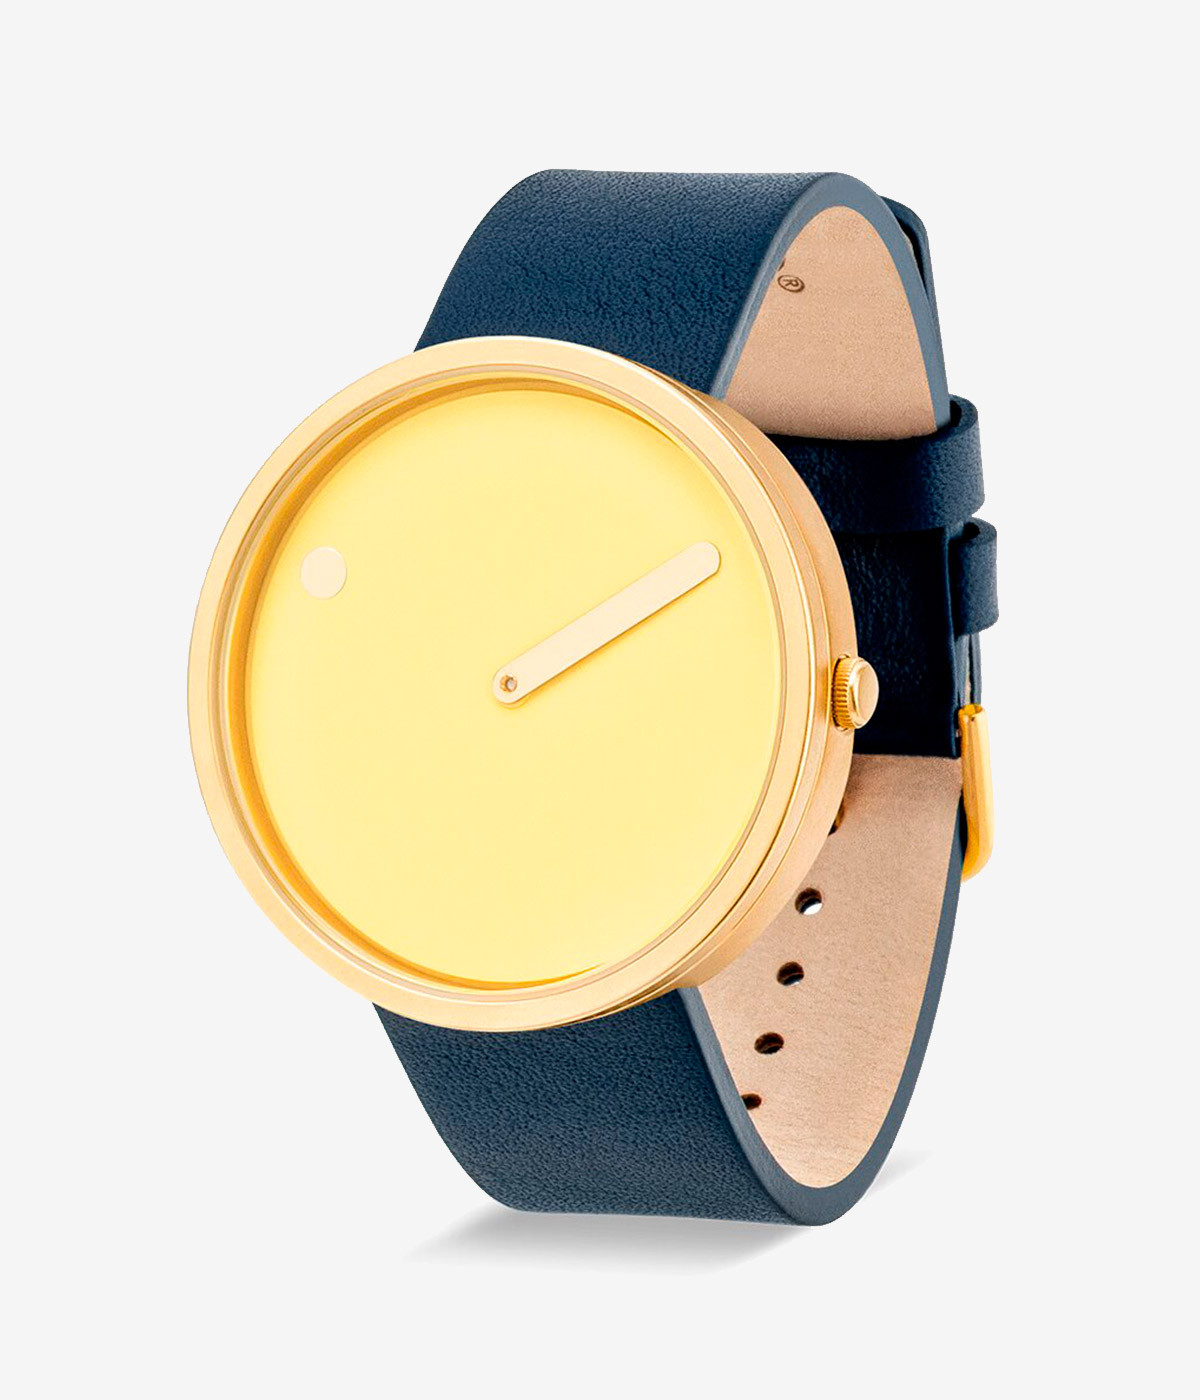 YELLOW DIAL / NAVY BLUE LEATHER STRAP 40 mm